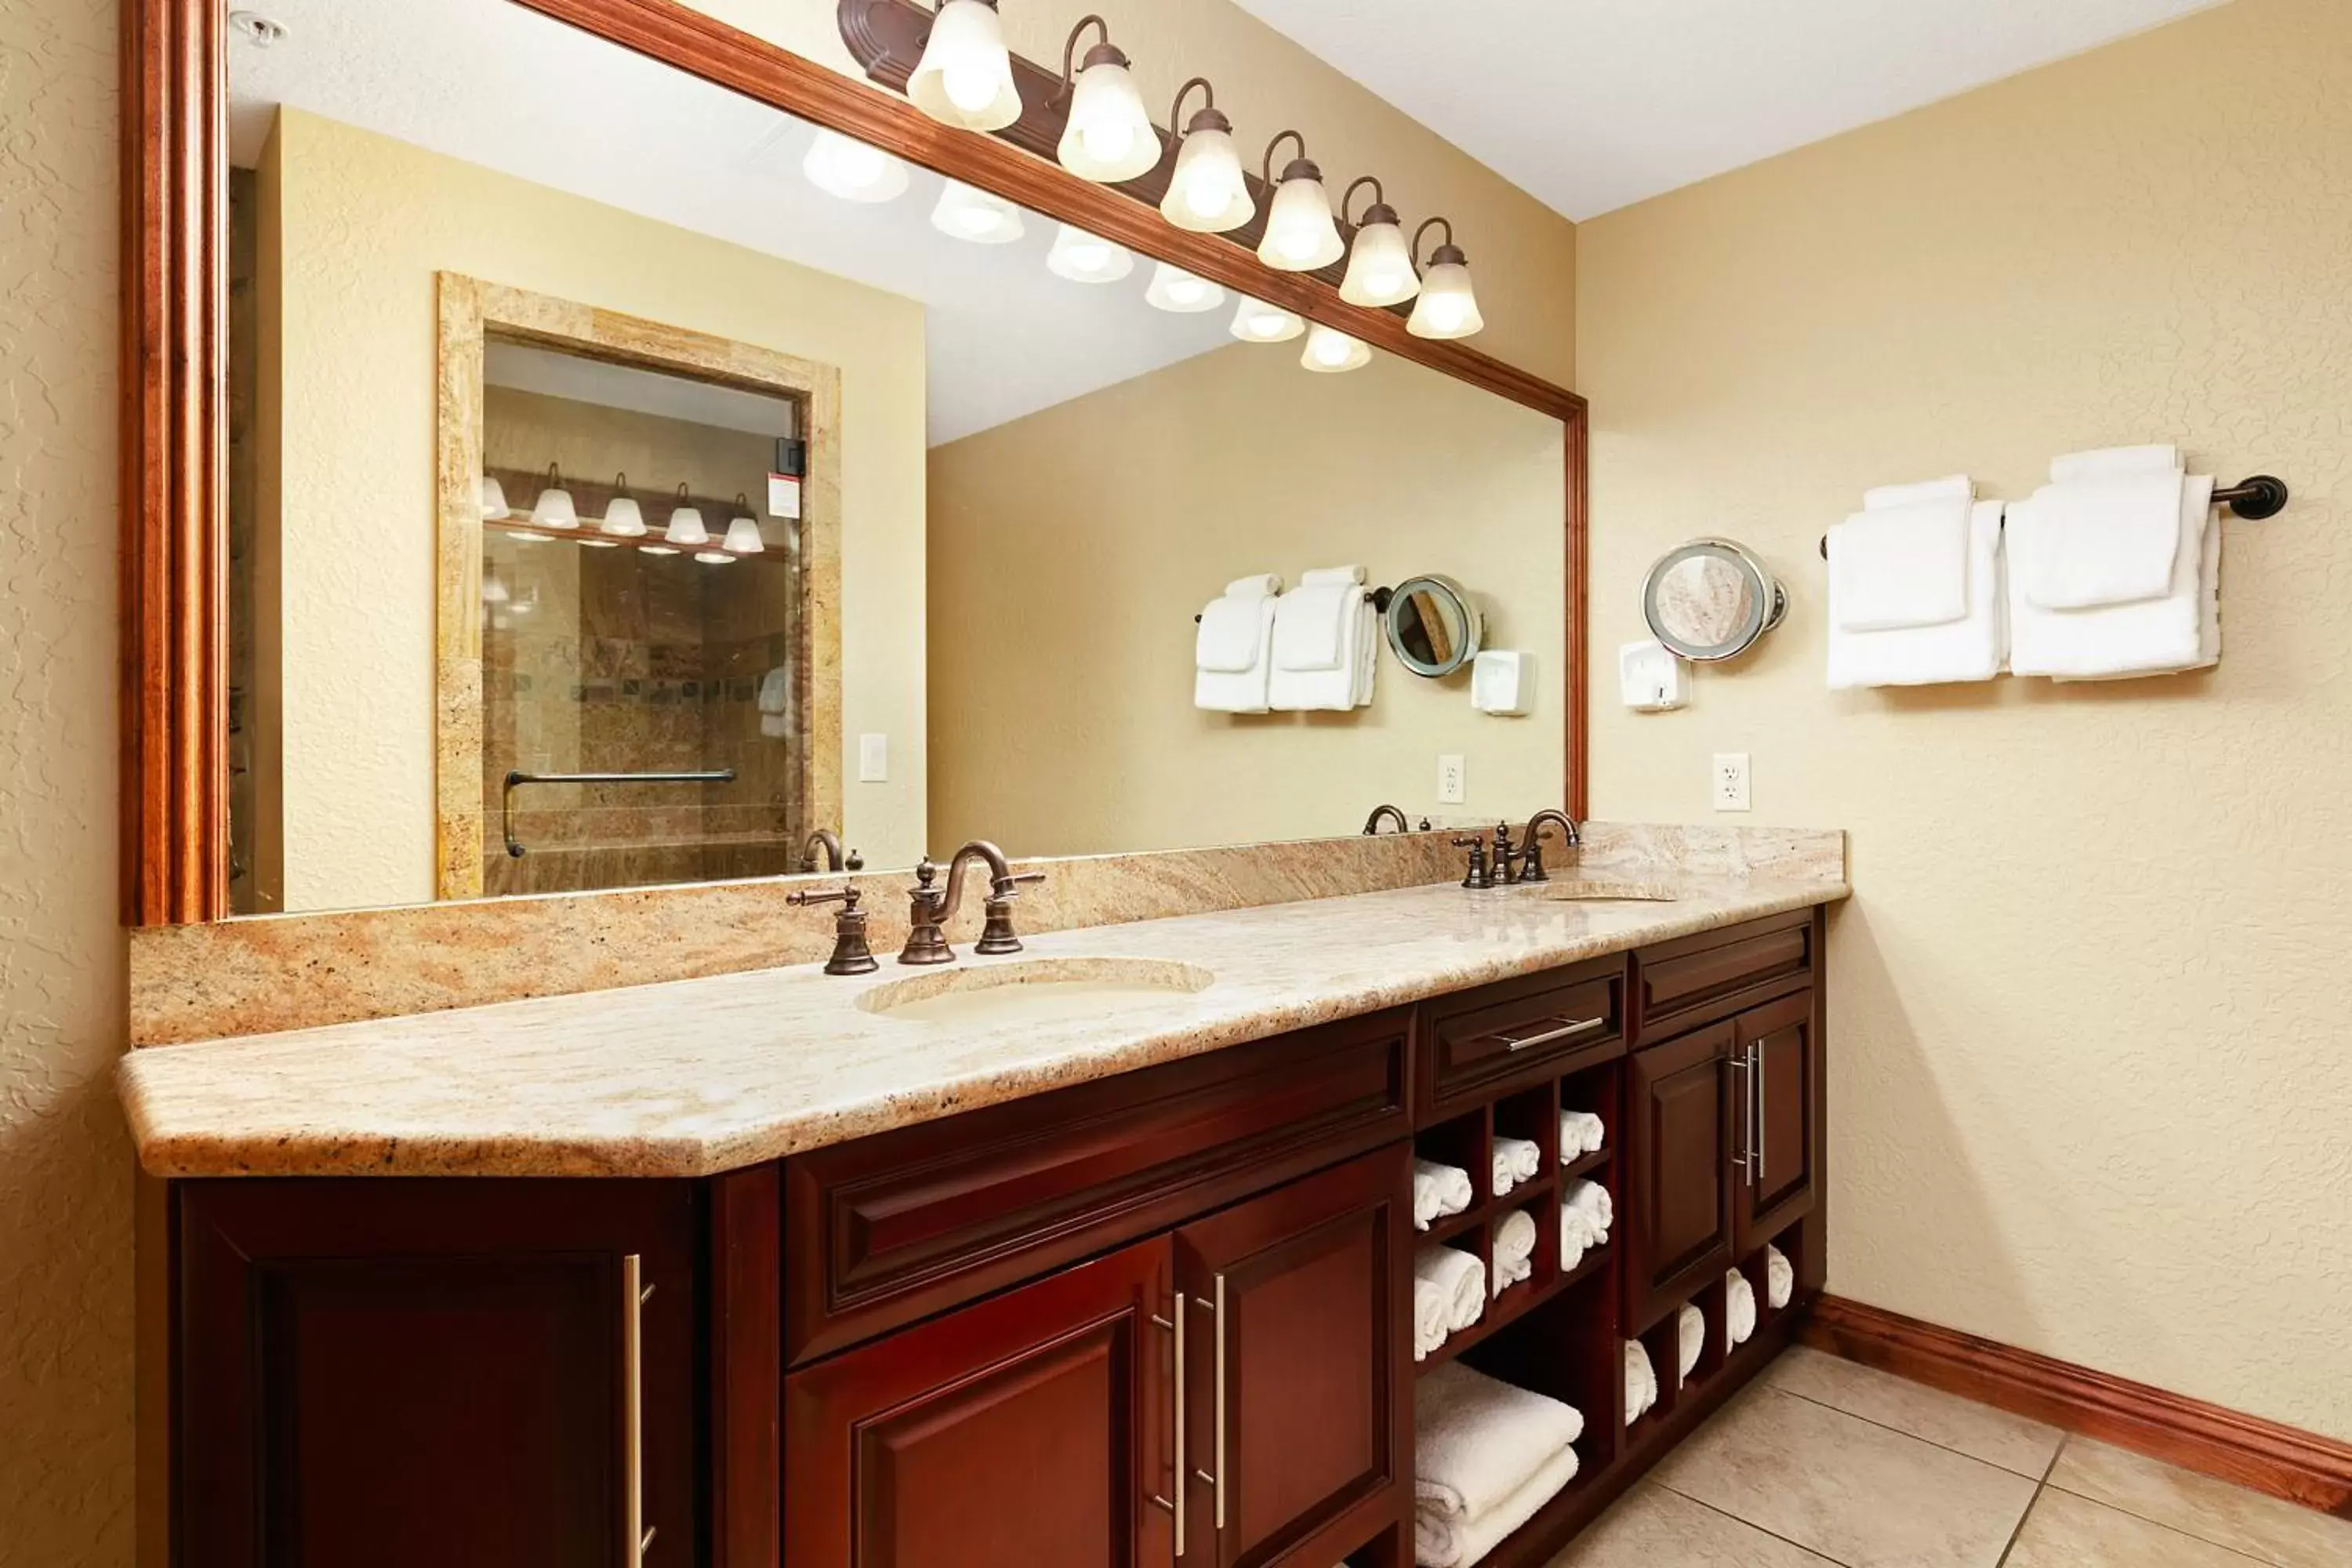 Bathroom in Condos at Canyons Resort by White Pines